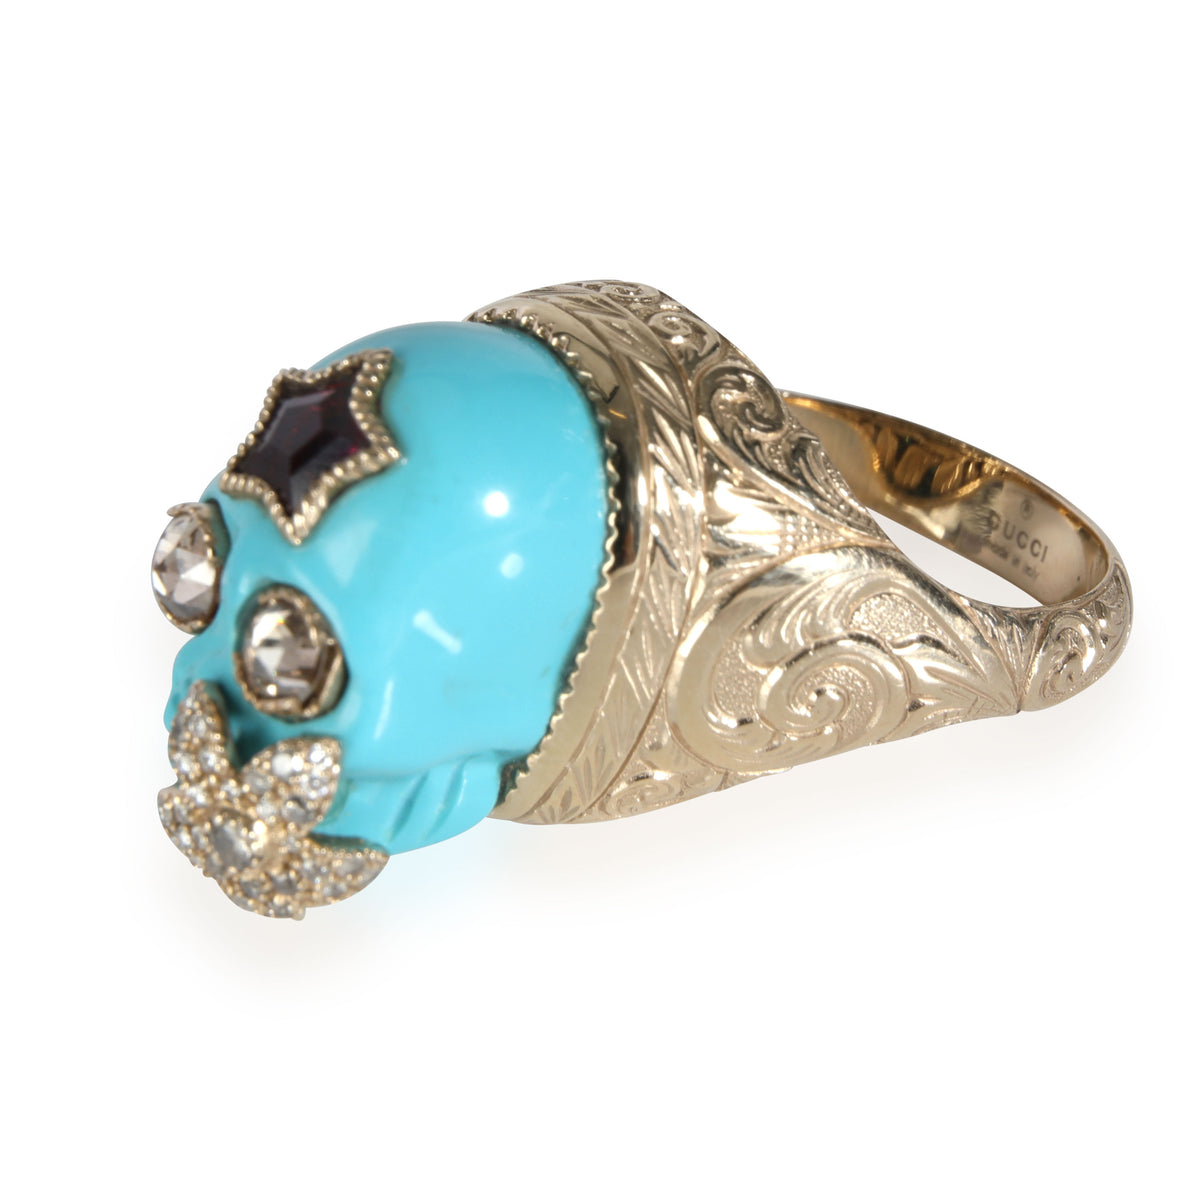 Gucci Turquoise Skull Ring with Rose Cut Diamond Eyes in 18K Yellow Gold